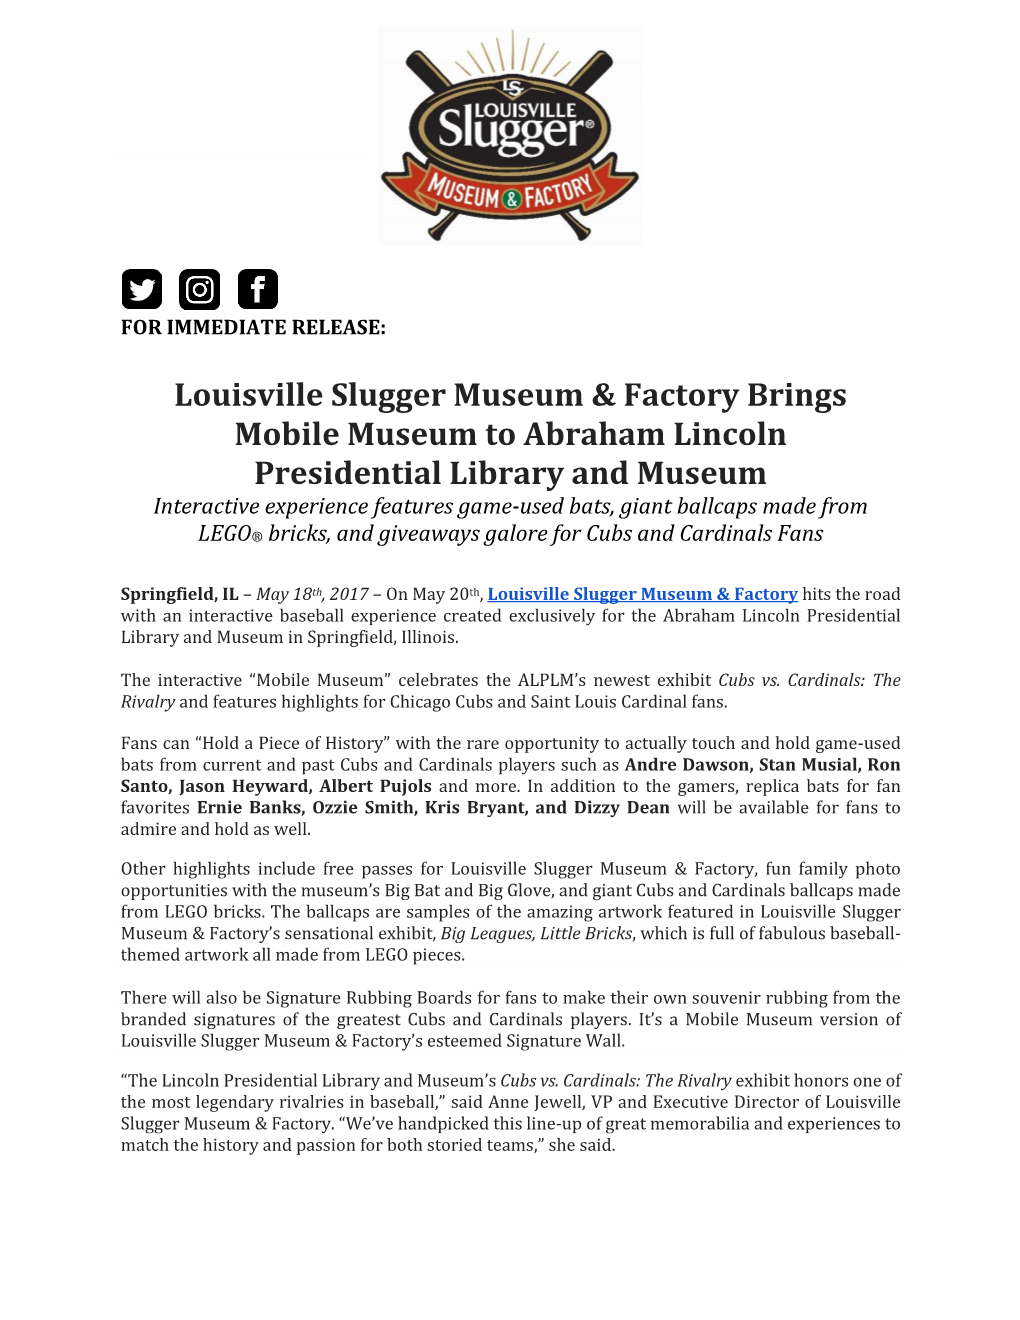 Louisville Slugger Museum & Factory Brings Mobile Museum to Abraham